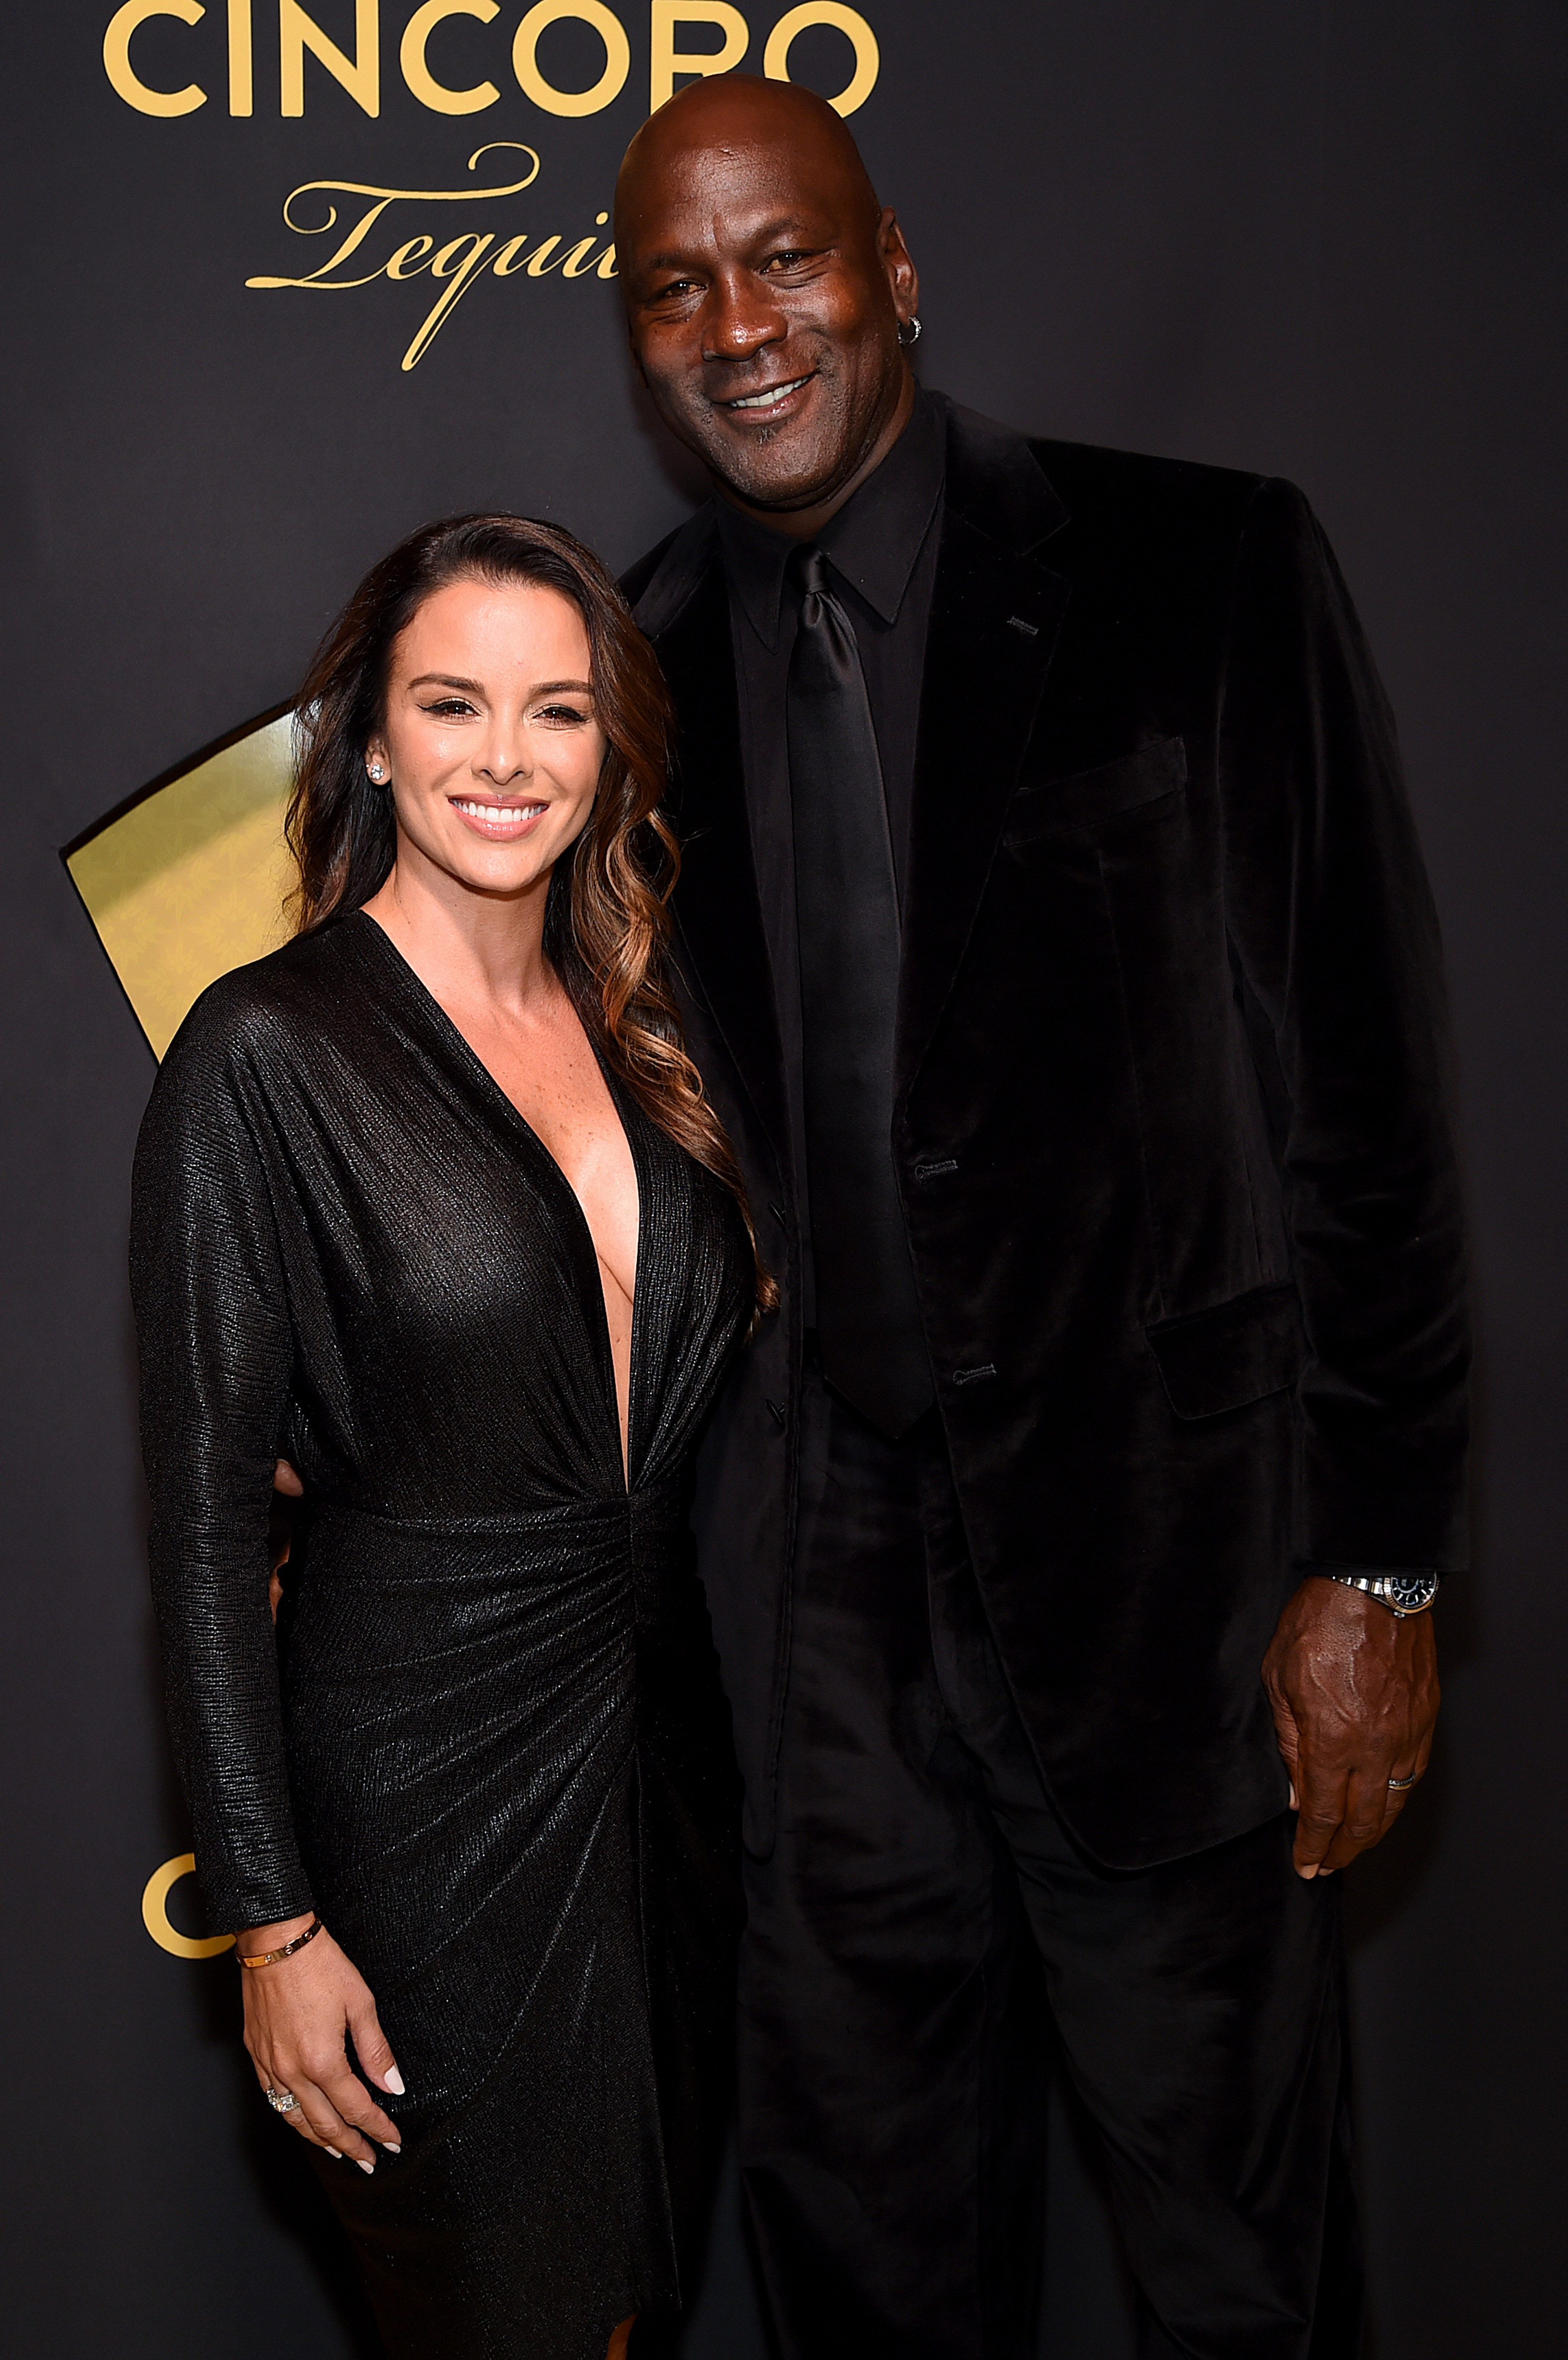 Yvette Prieto and Michael Jordan pose together at the Cincoro Tequila launch event on September 18, 2019